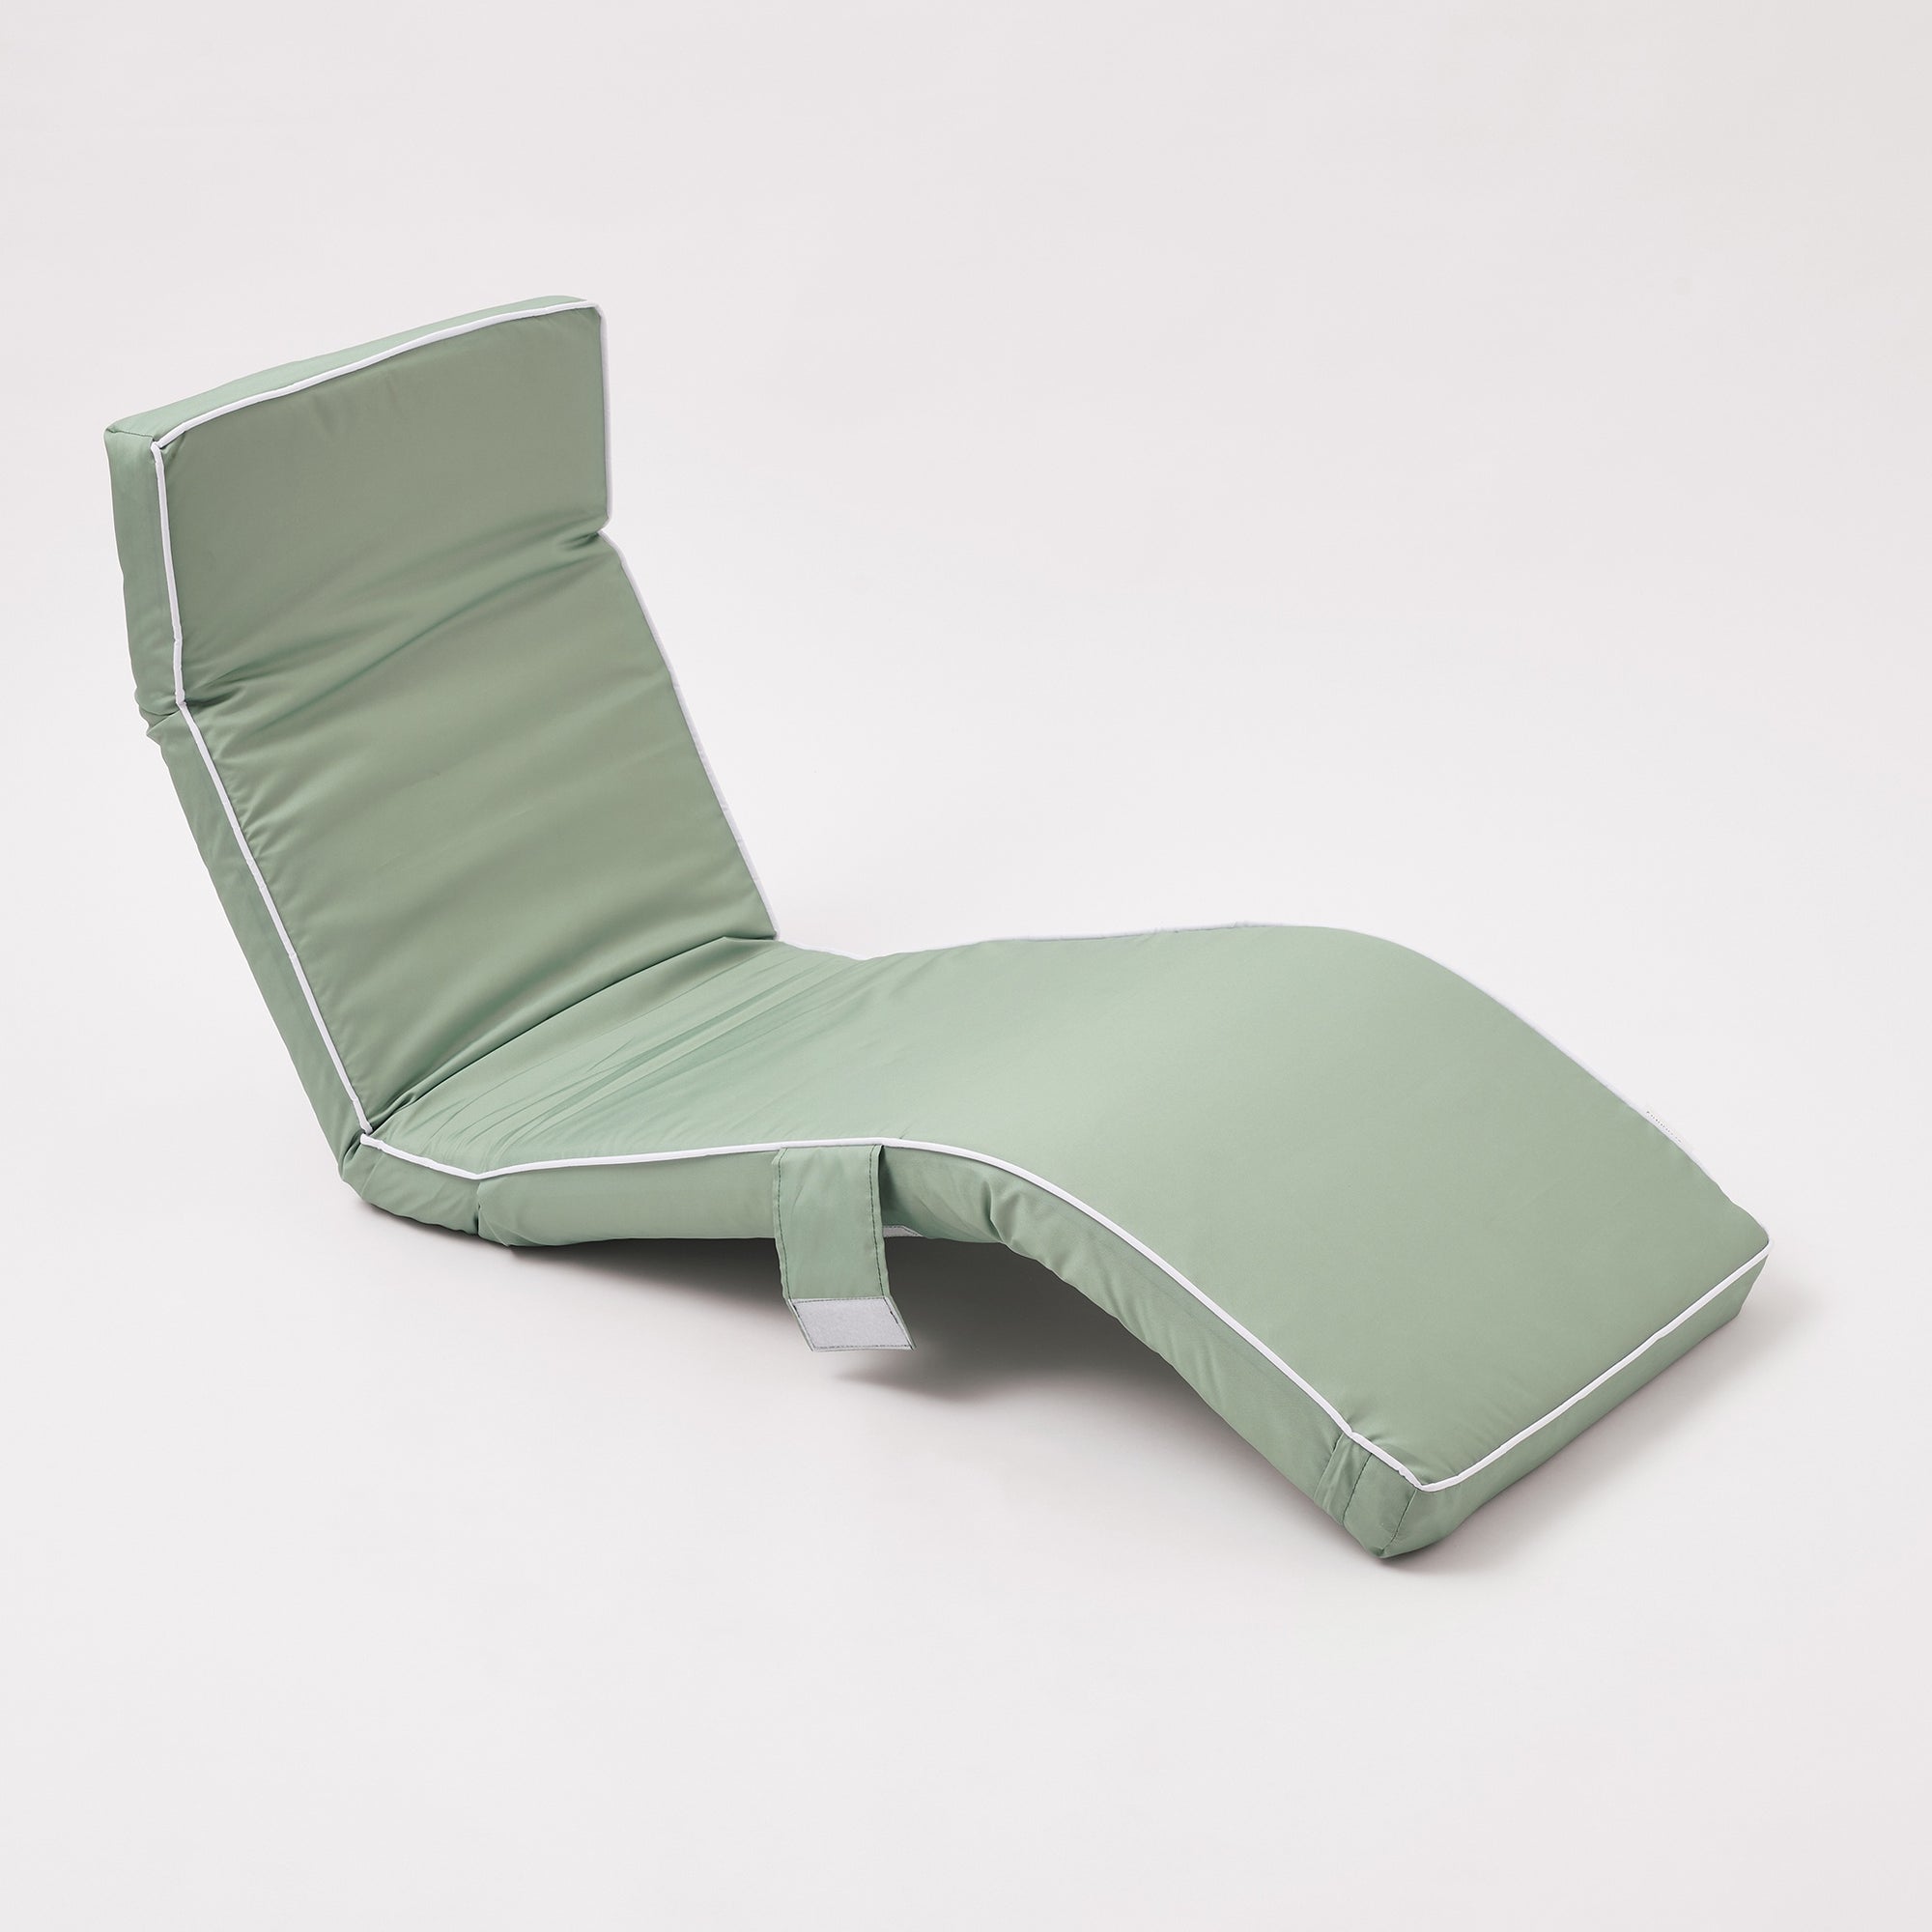 The Lounger Chair